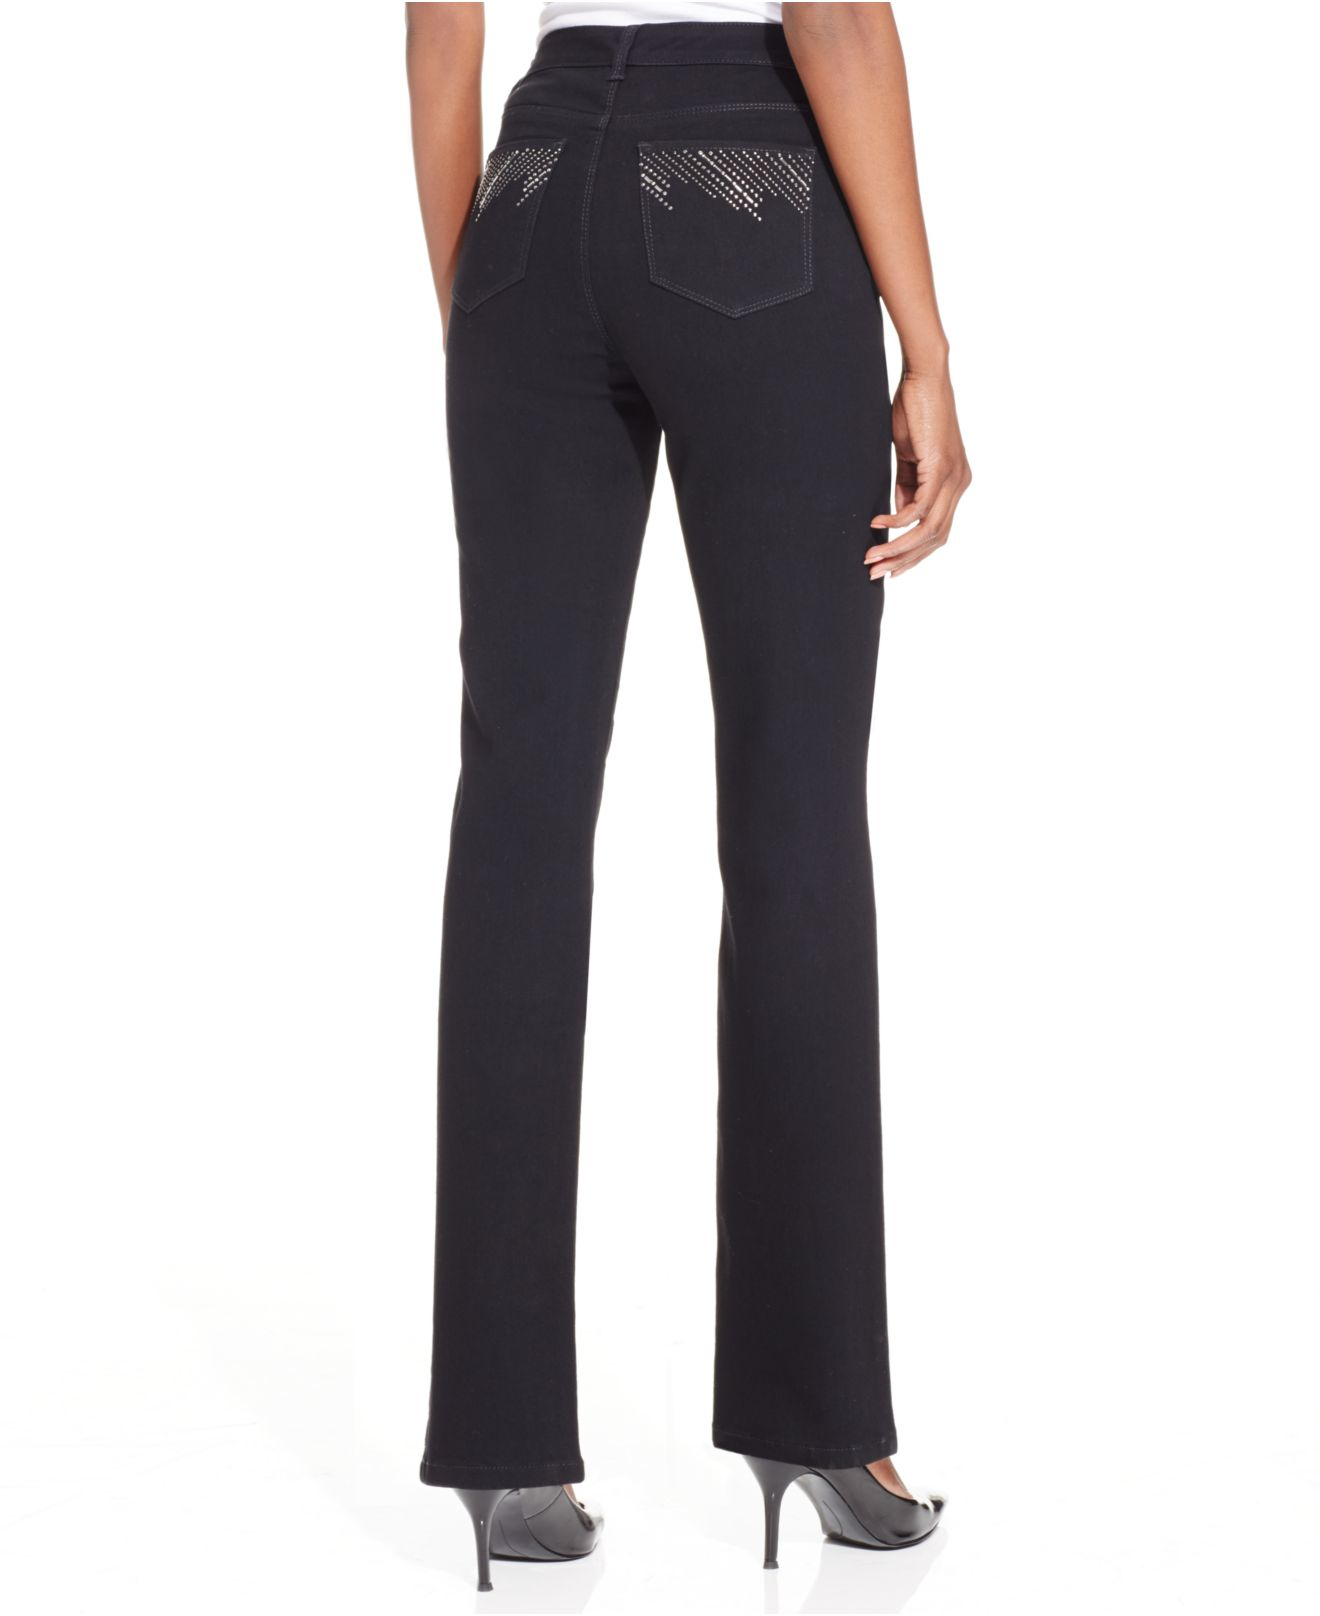 Lyst - Style & Co. Petite Tummy-control Straight-leg Jeans in Black